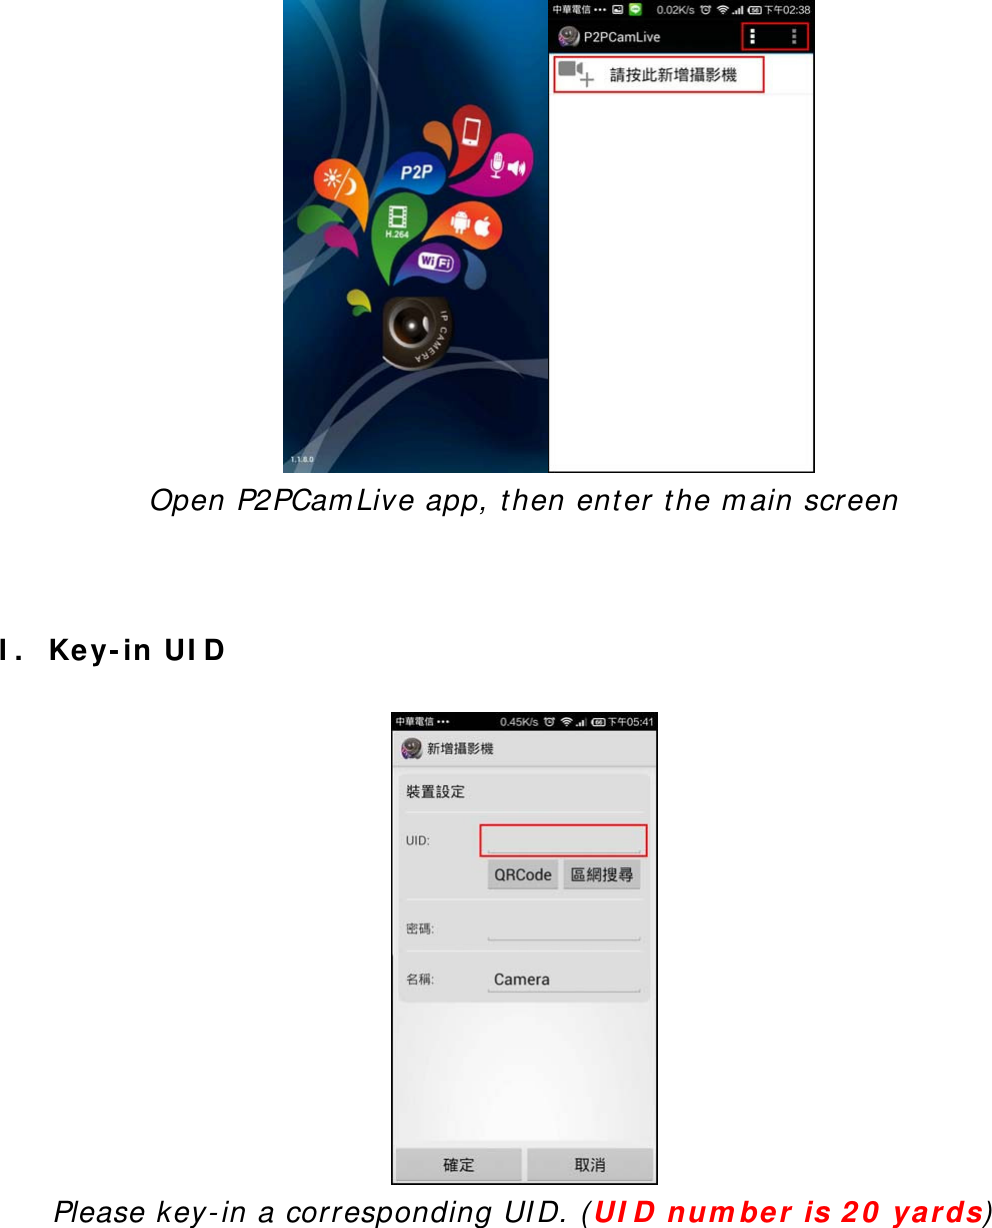  Open P2PCamLive app, then enter the main screen    I. Key-in UID   Please key-in a corresponding UID. (UID number is 20 yards)   